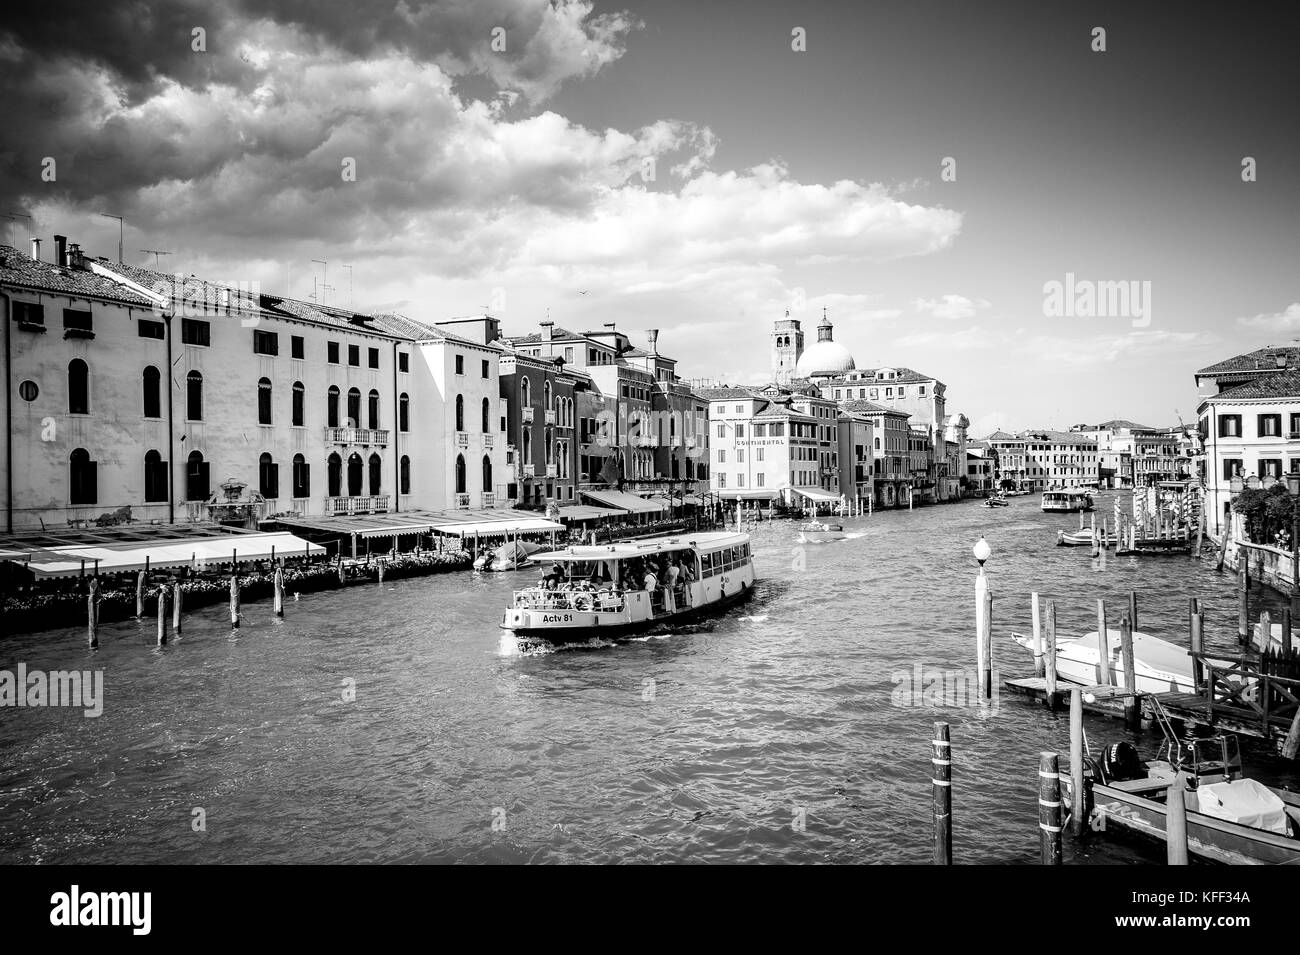 A vaporetto on the Grand Canal in Venice, Italy Stock Photo